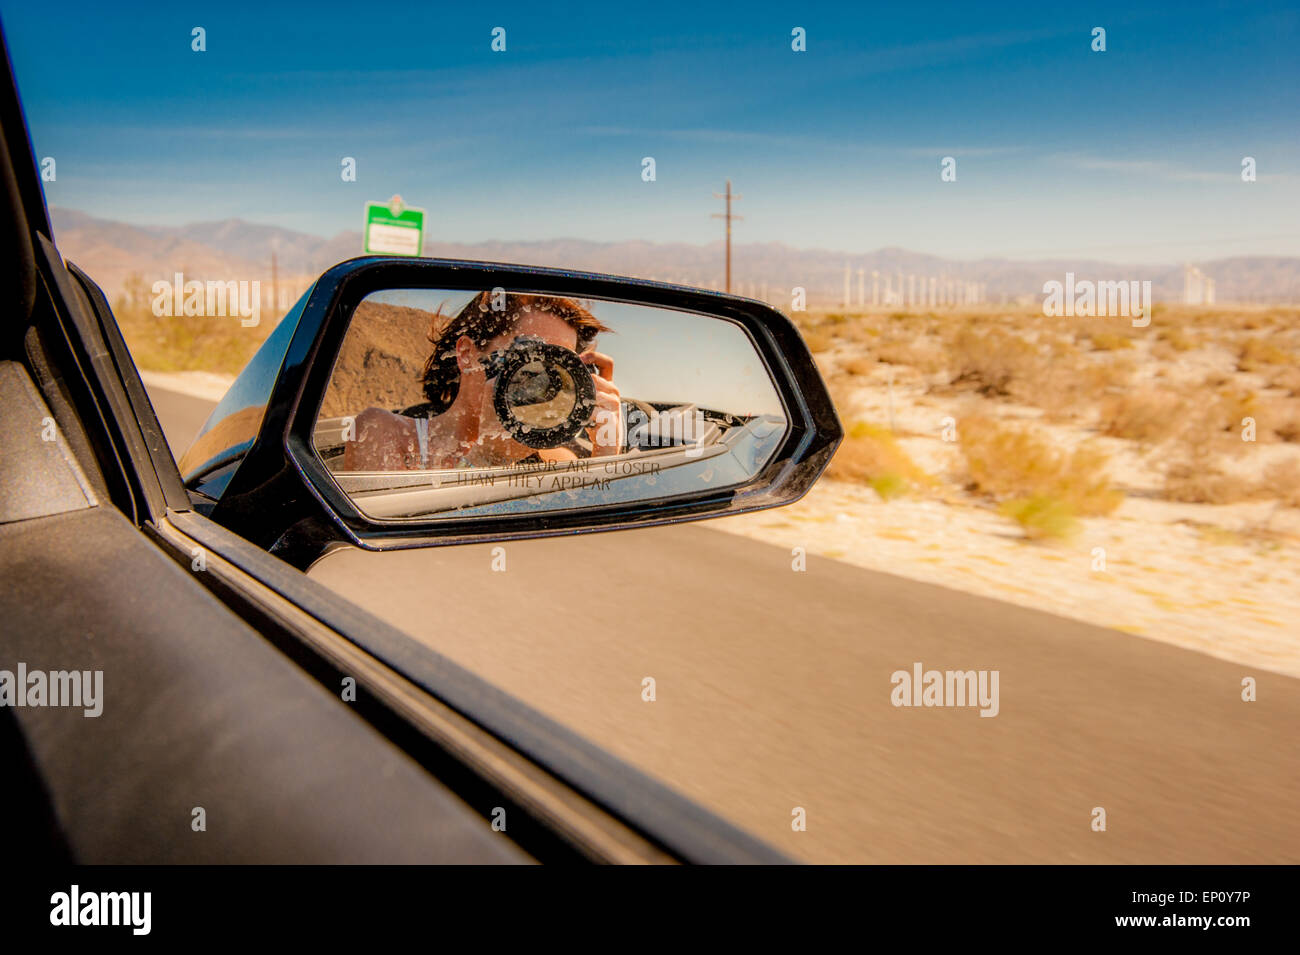 Young woman holding a camera is seen in the rear view mirror on a car near Palm Springs, California Stock Photo